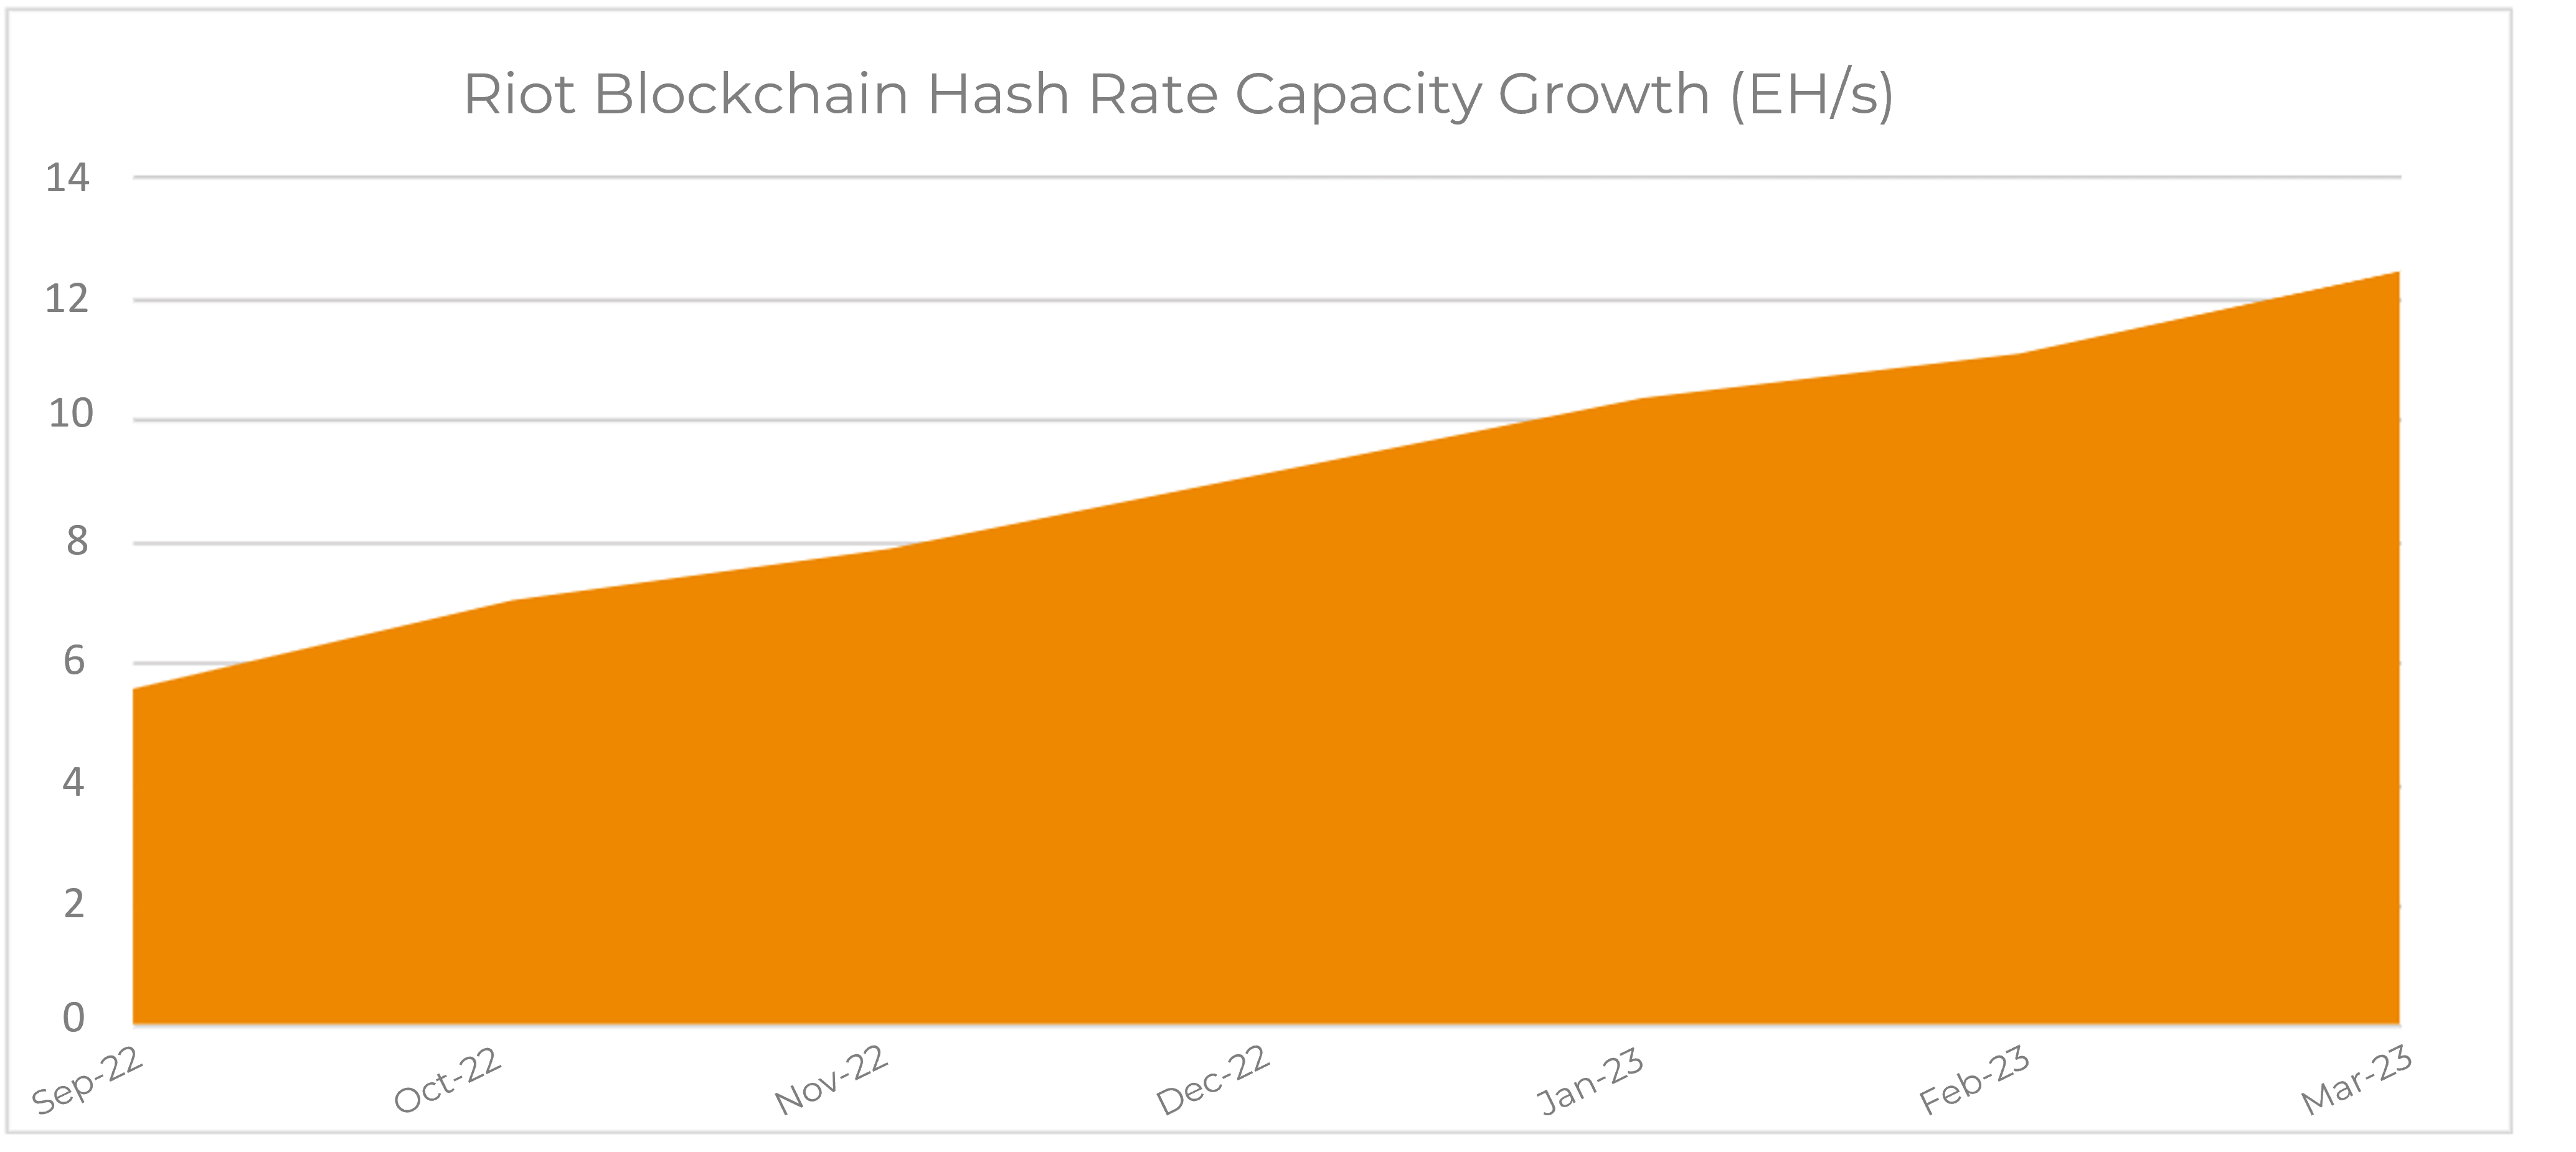 Riot Blockchain Hash Rate Capacity Growth Updated September 2022